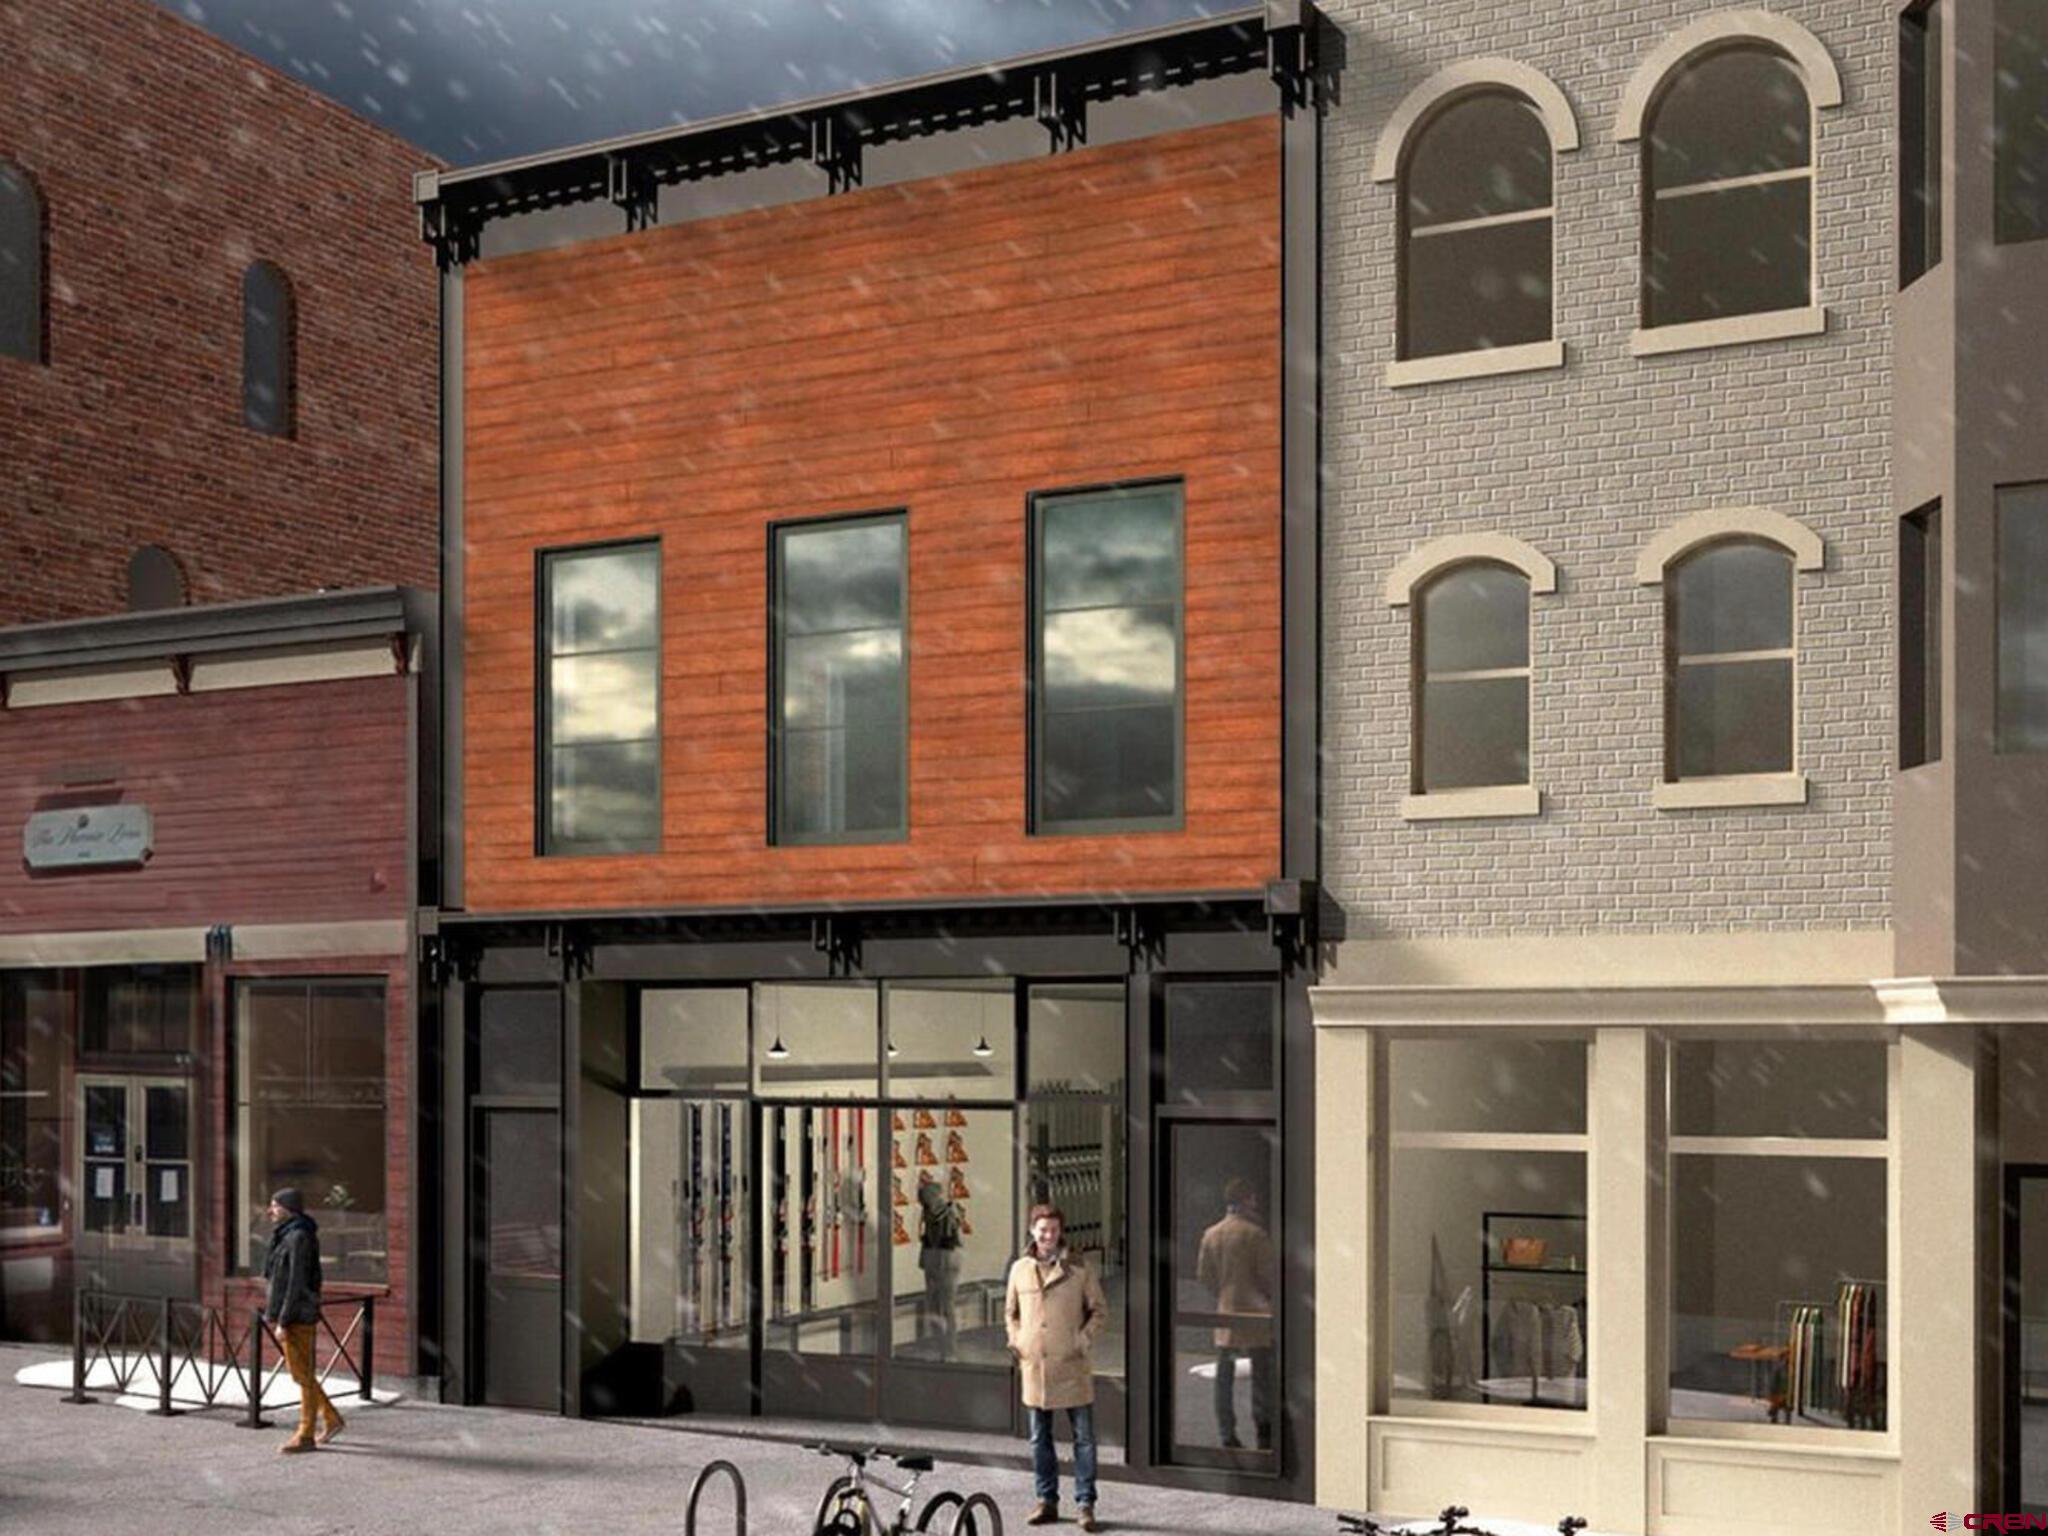 An extraordinary opportunity to purchase an iconic building in the most highly desired location on Main Street in downtown Telluride. The building currently comprises nearly 4,000 square feet of prime street-level commercial space and a three bedroom residence on the second level. Purchase of the property comes with fully approved HARC plans and complete construction drawings by Sante Architects for a full building remodel and expansion including the development of a 4,500 square foot penthouse with a stunning 800 square foot deck overlooking Main Street. This project is ready for permit.